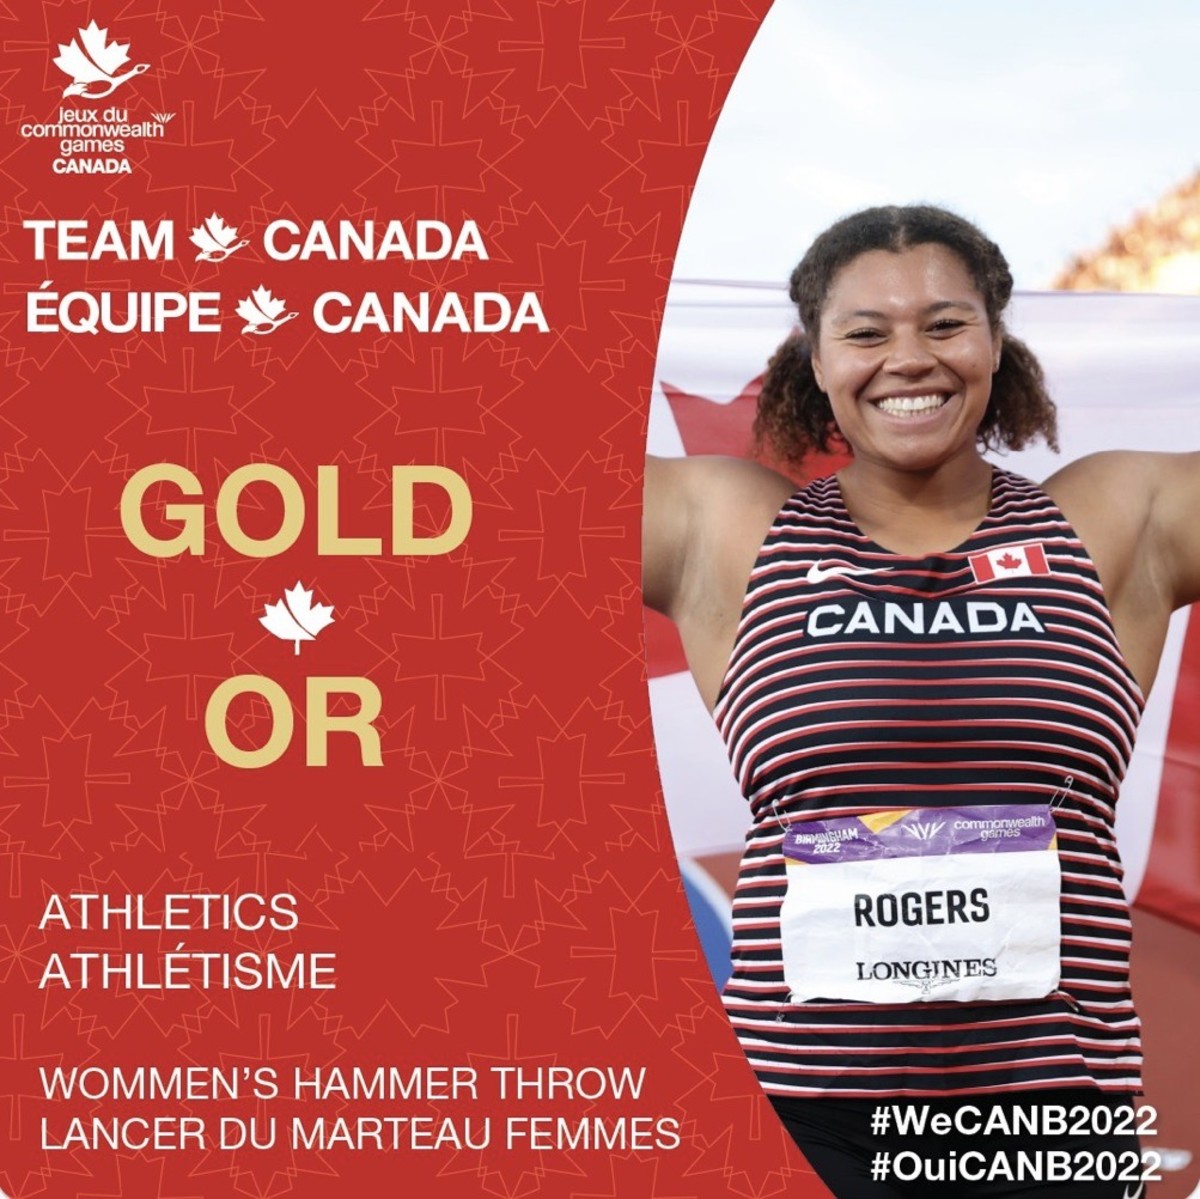 Camryn Rogers - Commonwealth gold